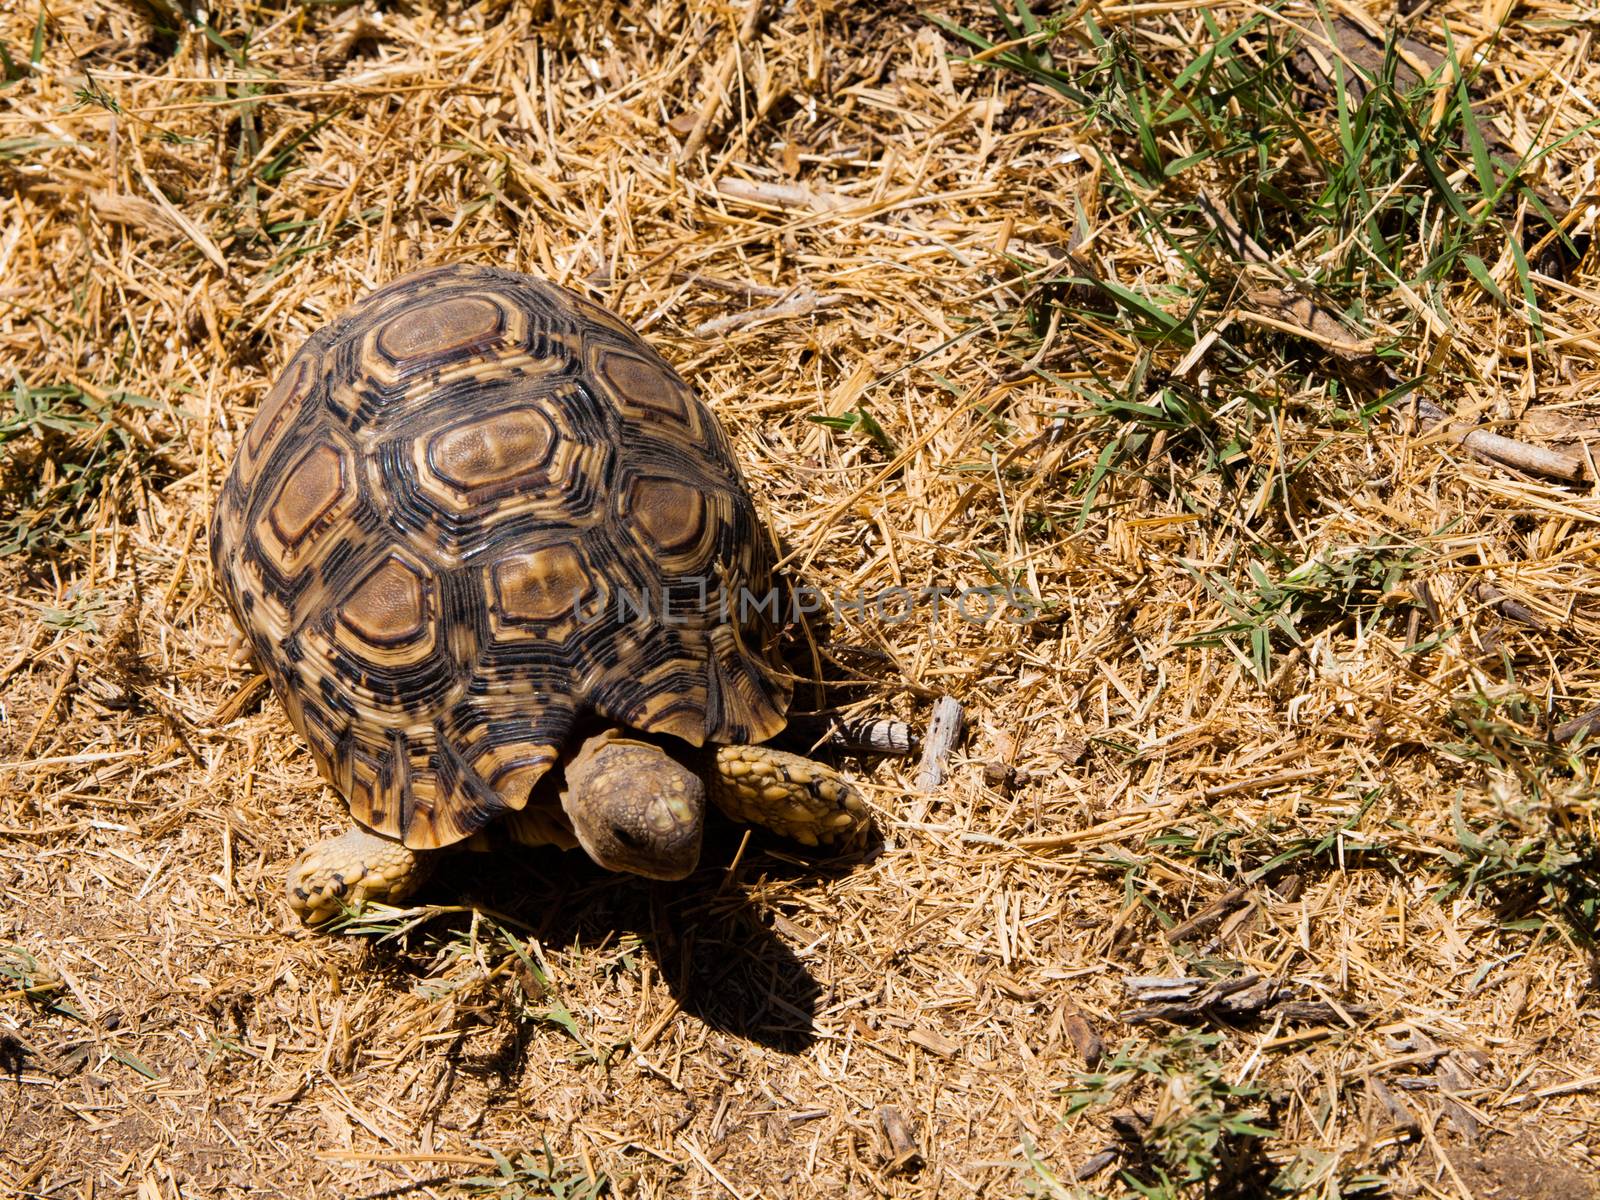 African turtle in the dry grassland